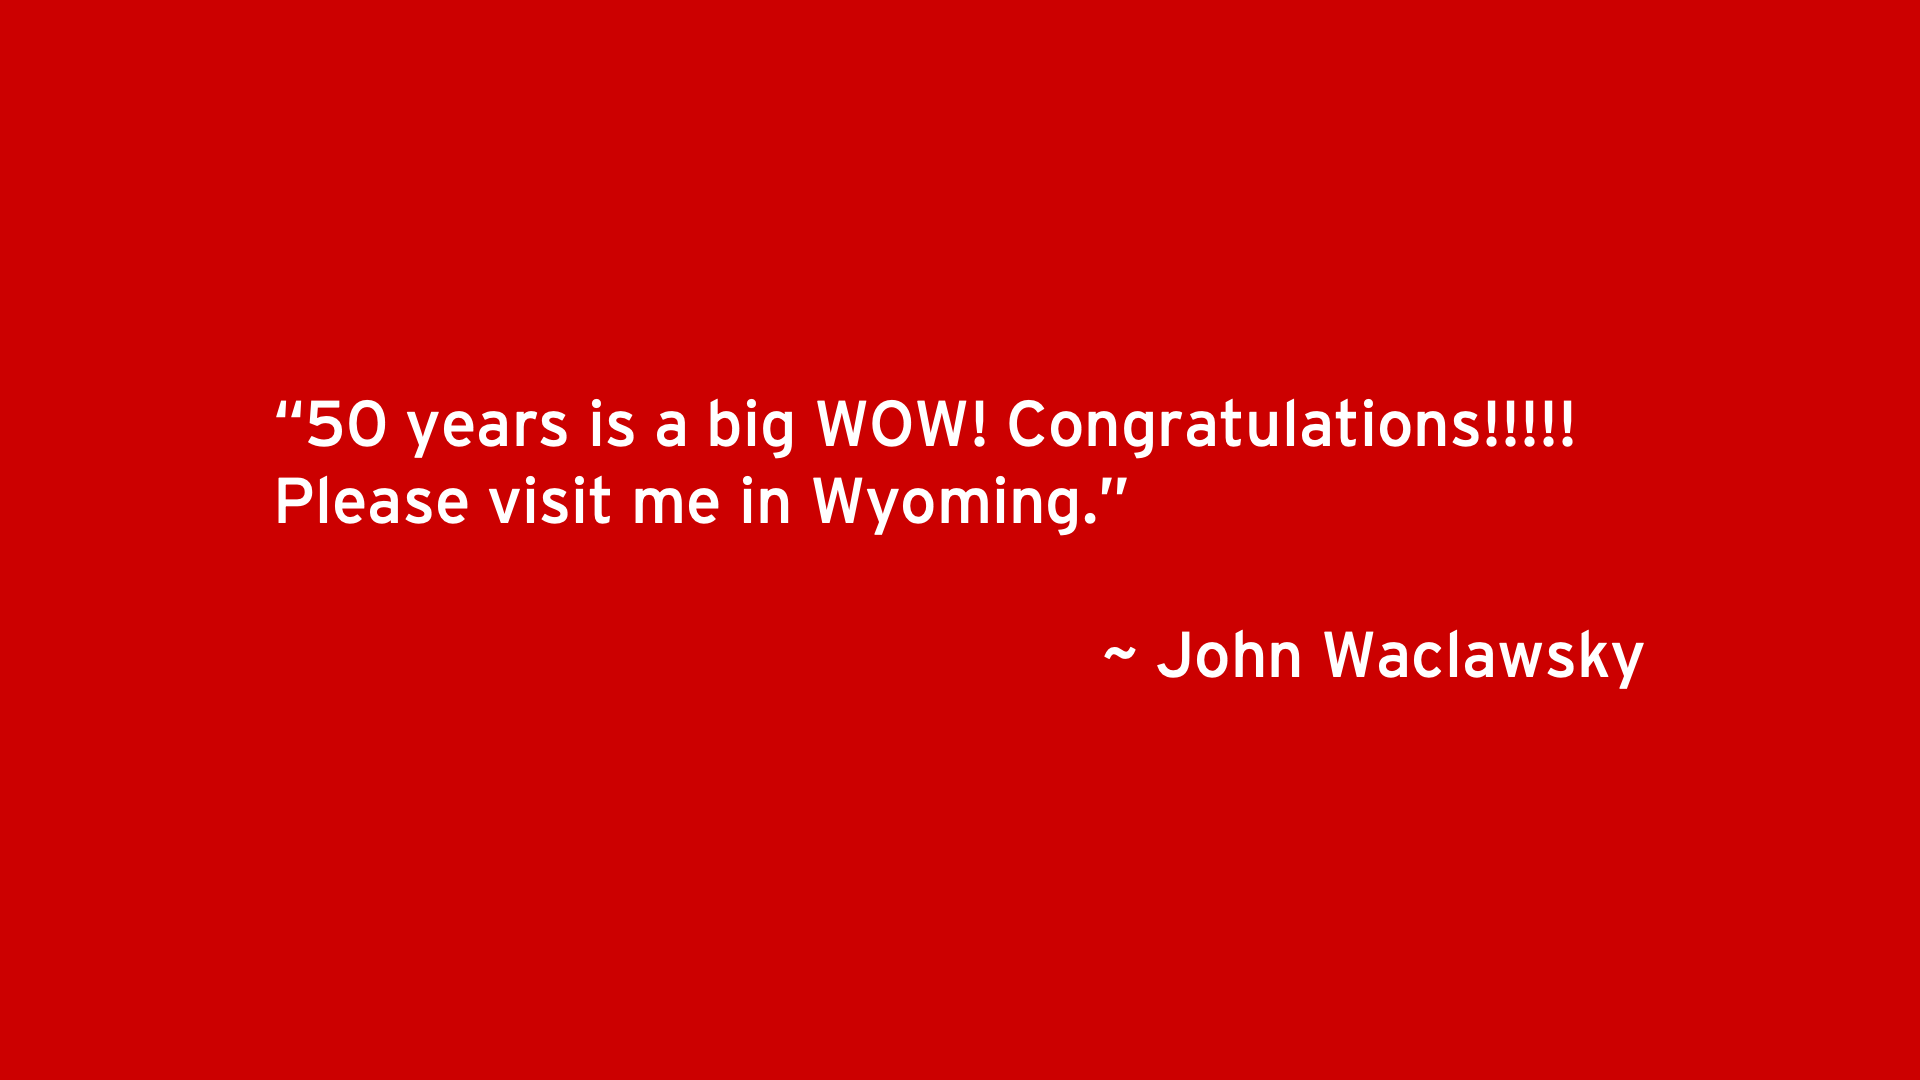 50 years is a big WOW! Congratulations!!!!! Please visit me in Wyoming. - John Waclawsky